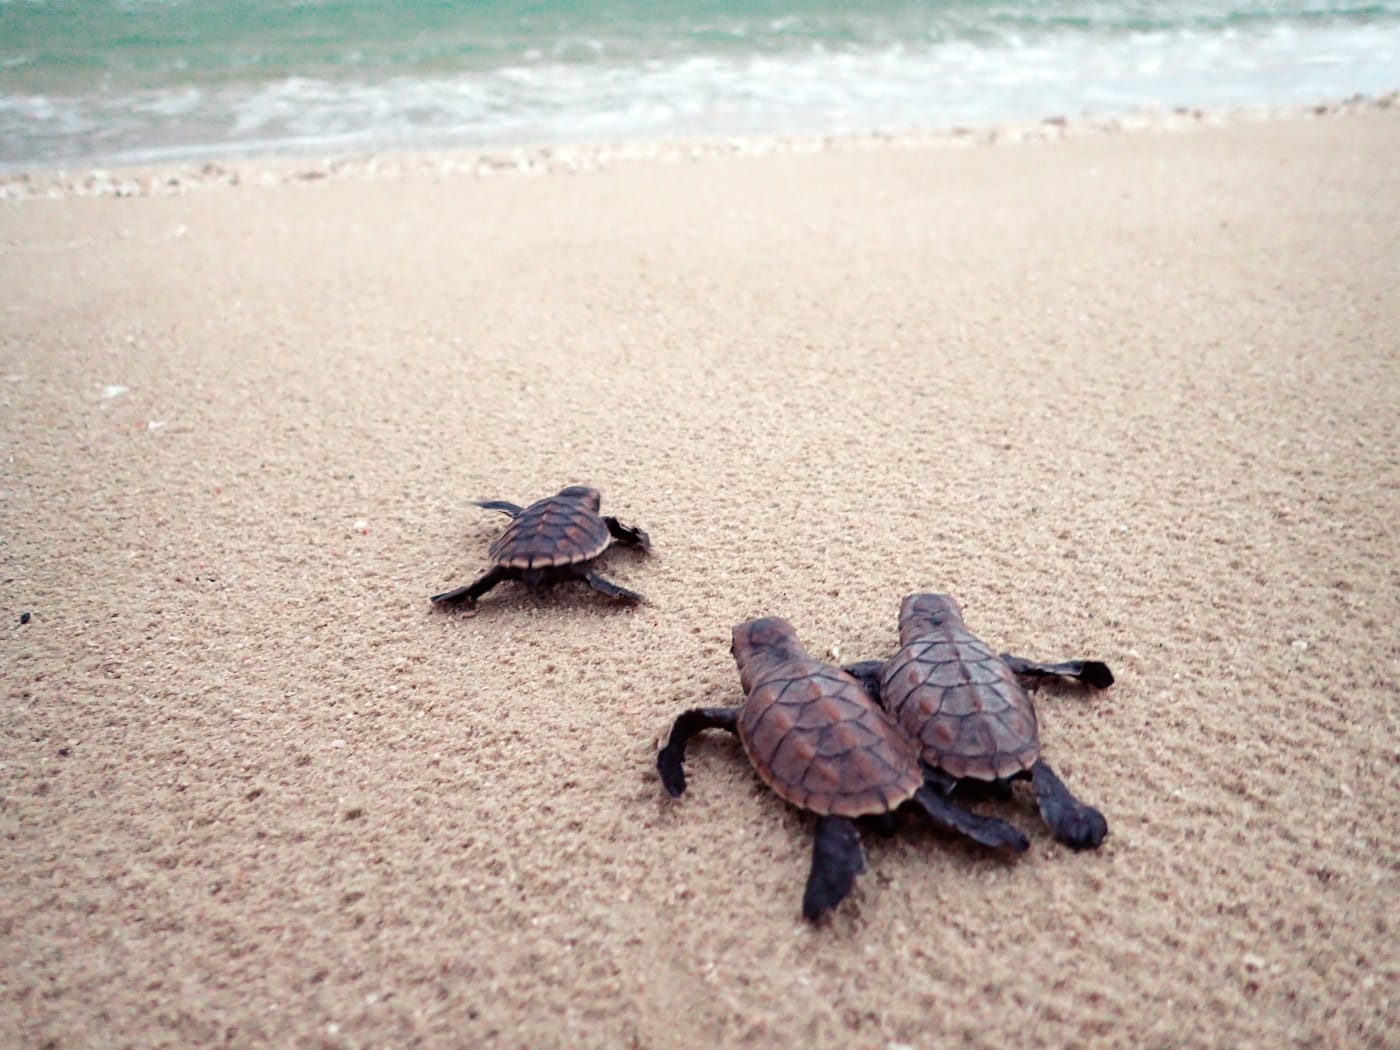 A green and two hawksbill turtle hatchlings making their may to the ocean.
In February 2017, WWF-Australia worked with Apudthama Indigenous Rangers and the Department of Environment and Heritage Protection to attach satellite transmitters to ten hawksbill turtles on Milman Island. The satellites are used to gather data about where the turtles feed, which reefs they prefer, what paths they take, and what threats they’re facing, which allows WWF and its partners to protect them more effectively.